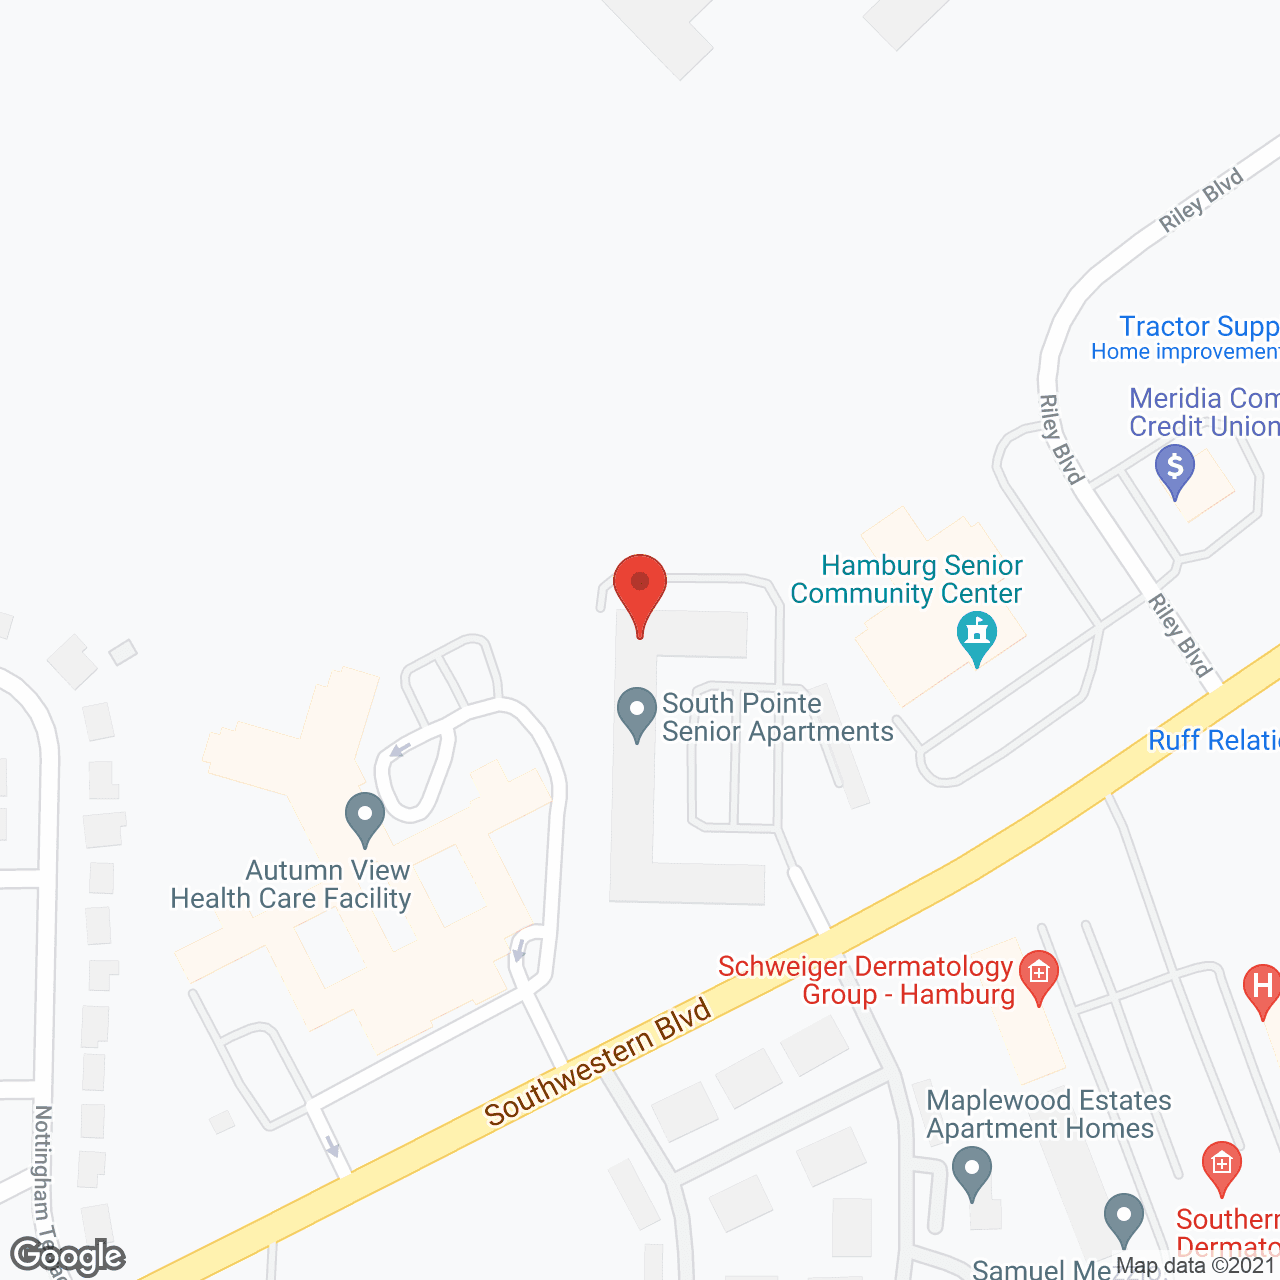 South Pointe Senior Apartments in google map